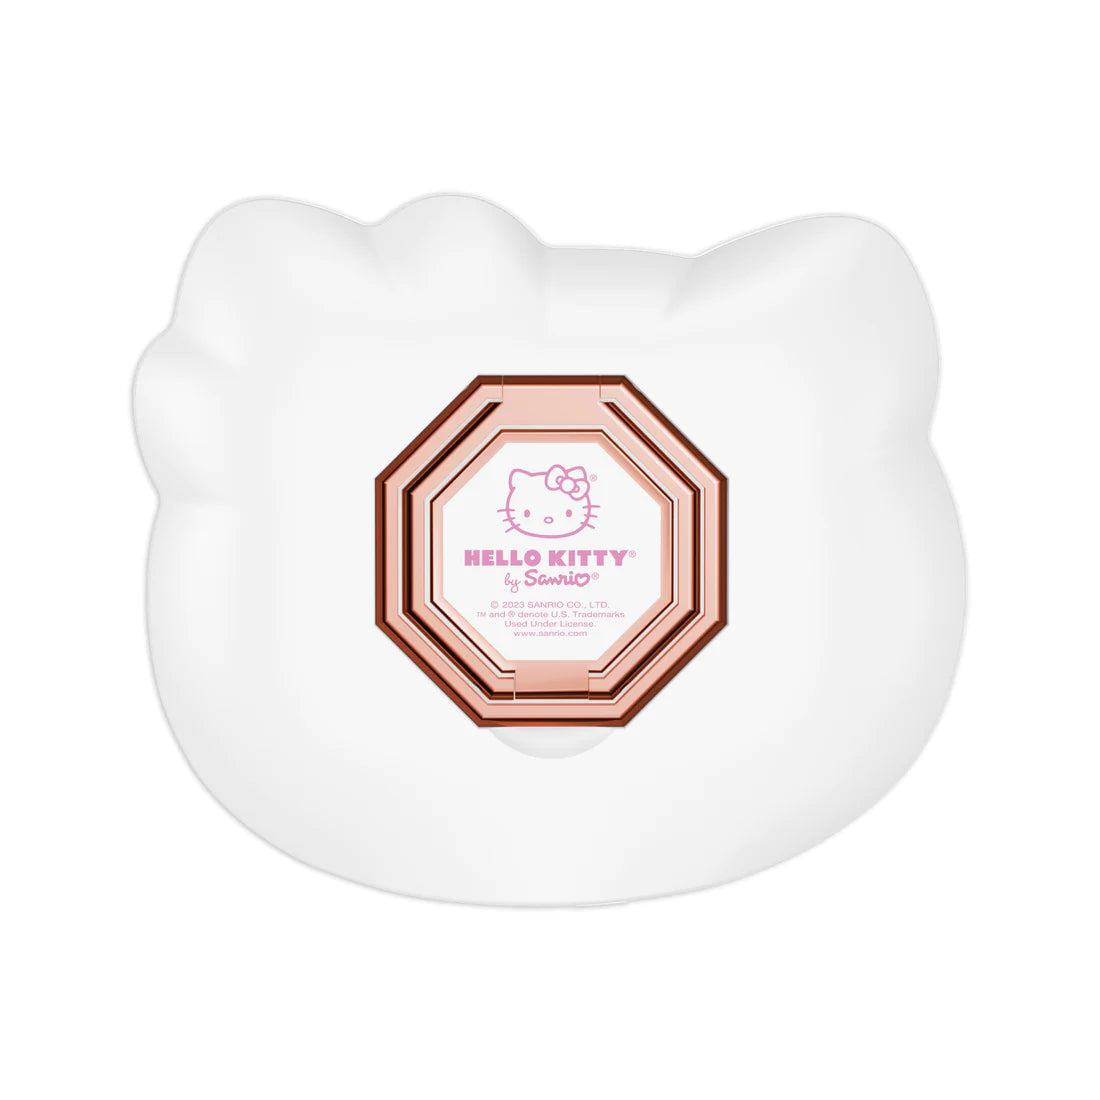 Impressions Vanity - Hello Kitty Pocket Mirror with Ring Stand White